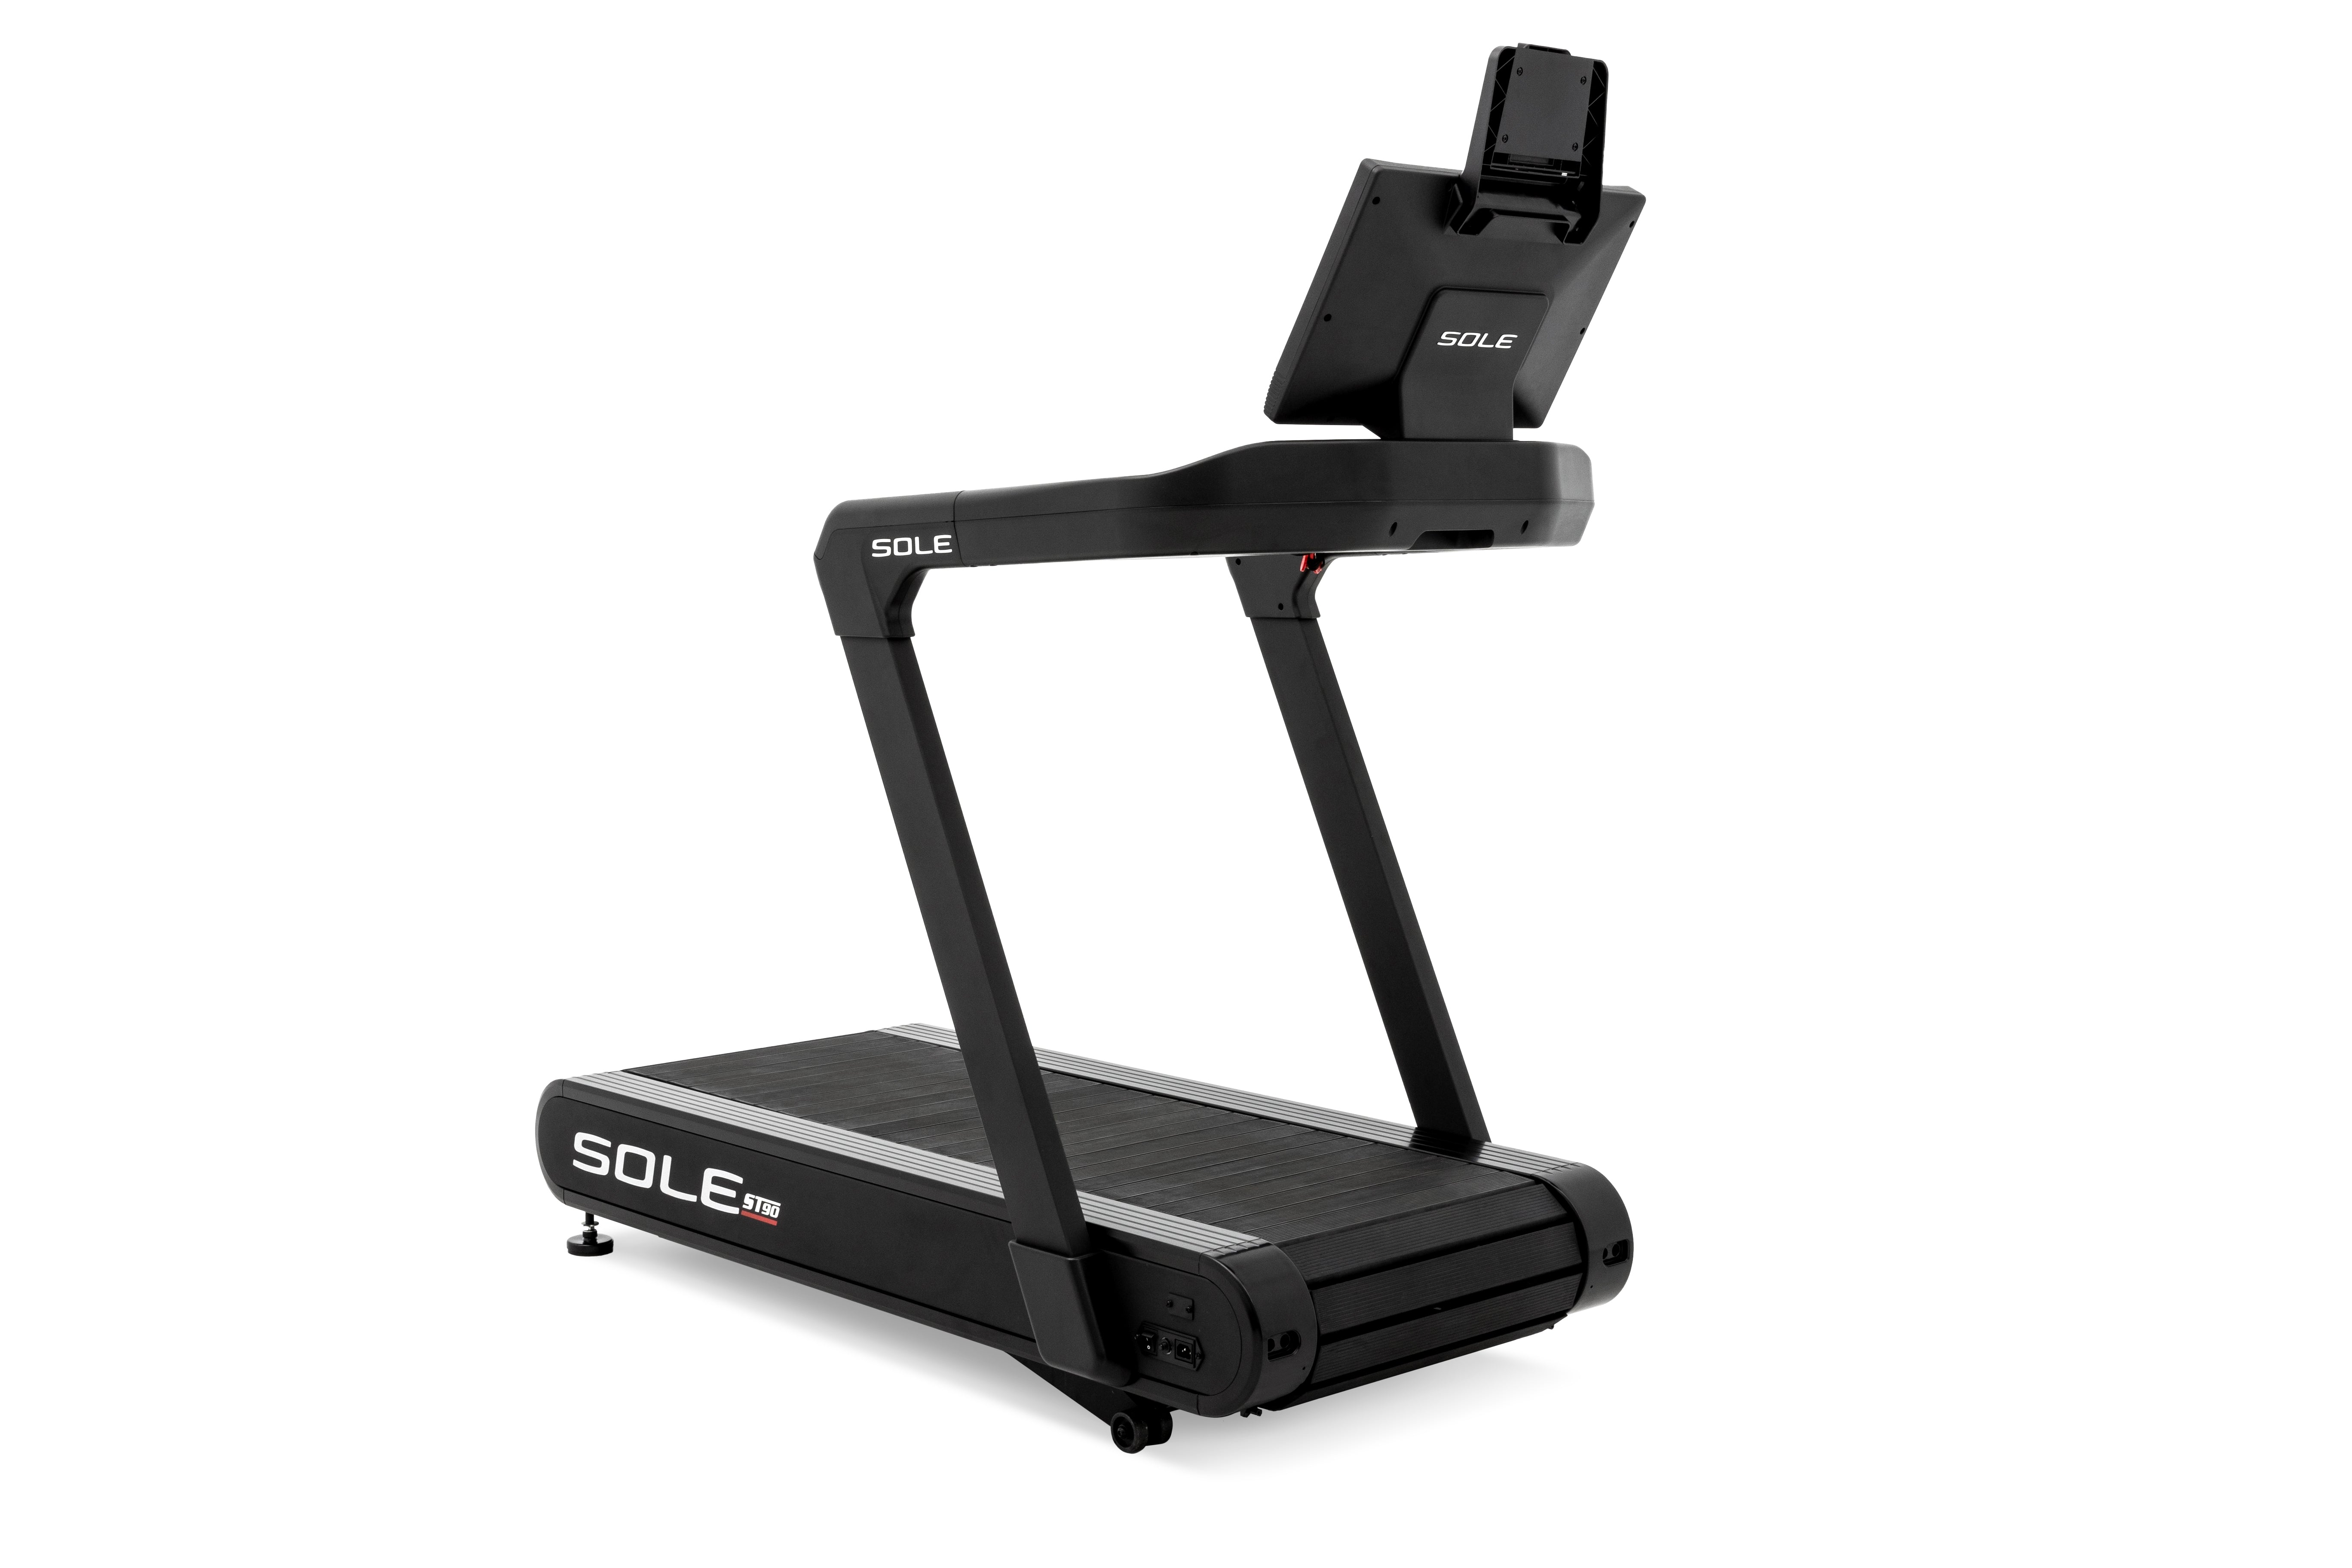 Front perspective of the Sole ST90 treadmill, featuring its black frame, prominent digital display console, branded running belt, and side arms, set against a white background.